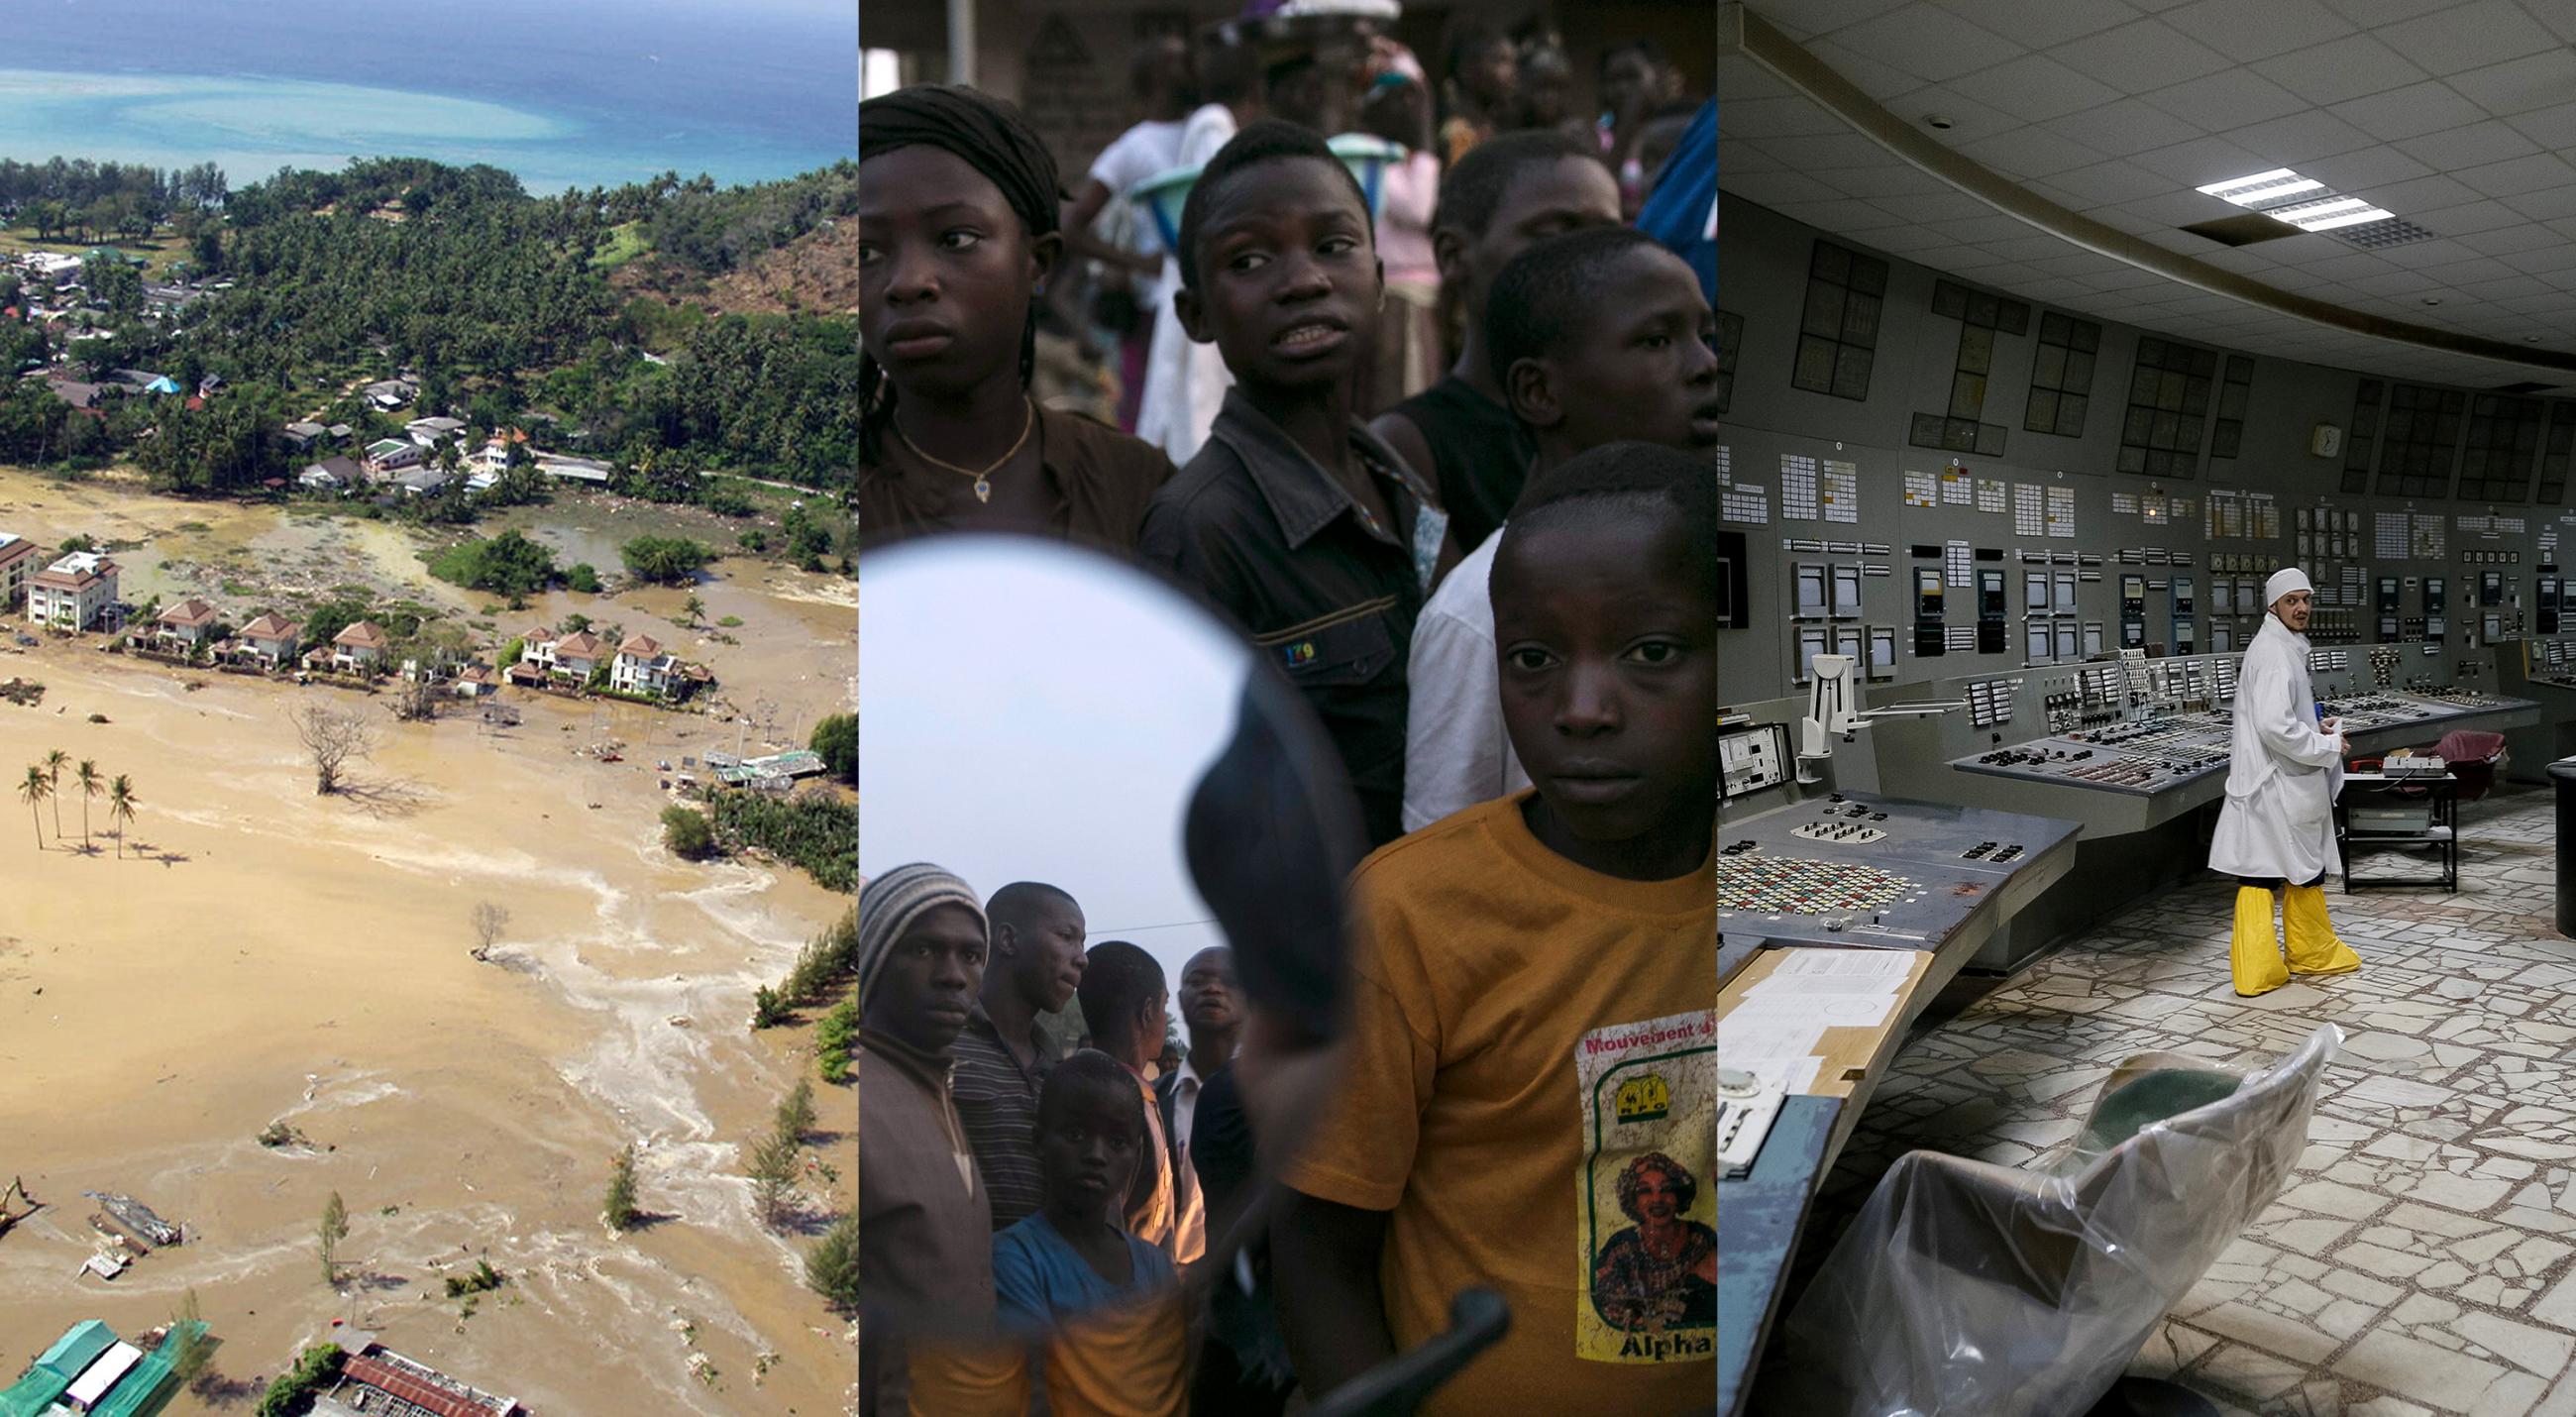  Image shows three separate scenes: an aerial shot of Phuket, Thailand shortly after the tsunami, bystanders in the town of Koidu, Sierra Leone, looking on the body of an ebola victim, and an employee at the control center of the Chernobyl nuclear power plant. 